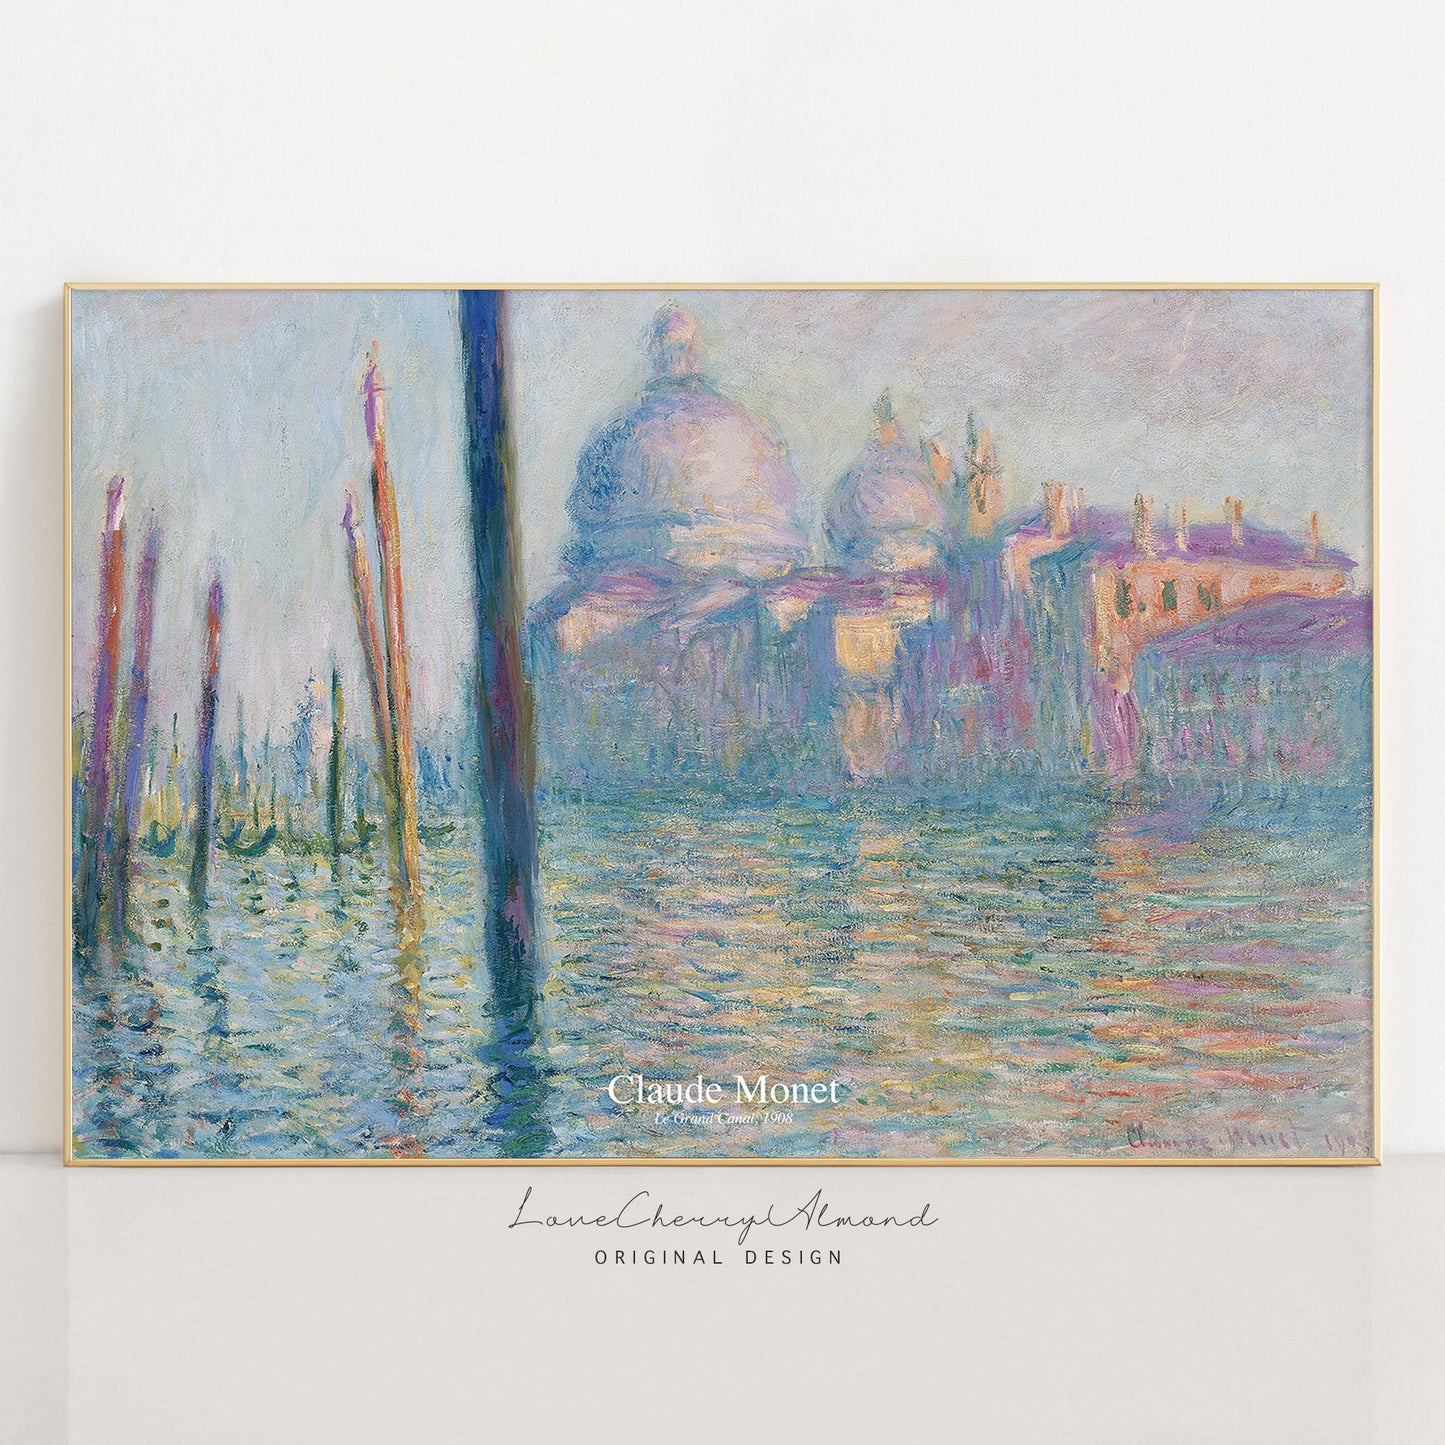 Le Grand Canal, 1908